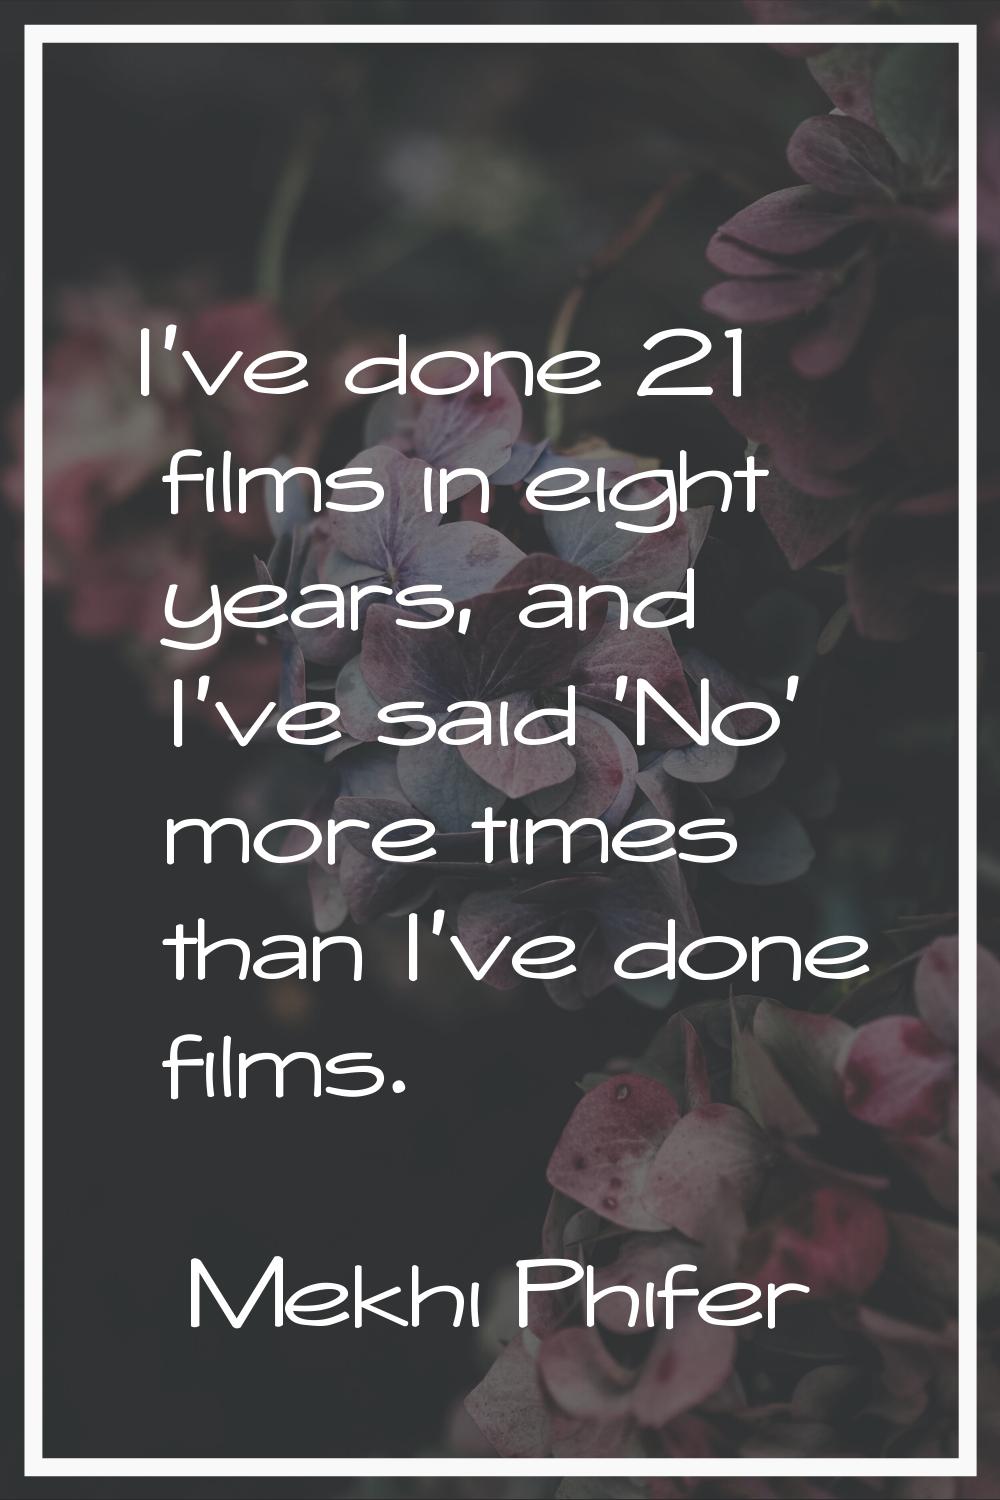 I've done 21 films in eight years, and I've said 'No' more times than I've done films.